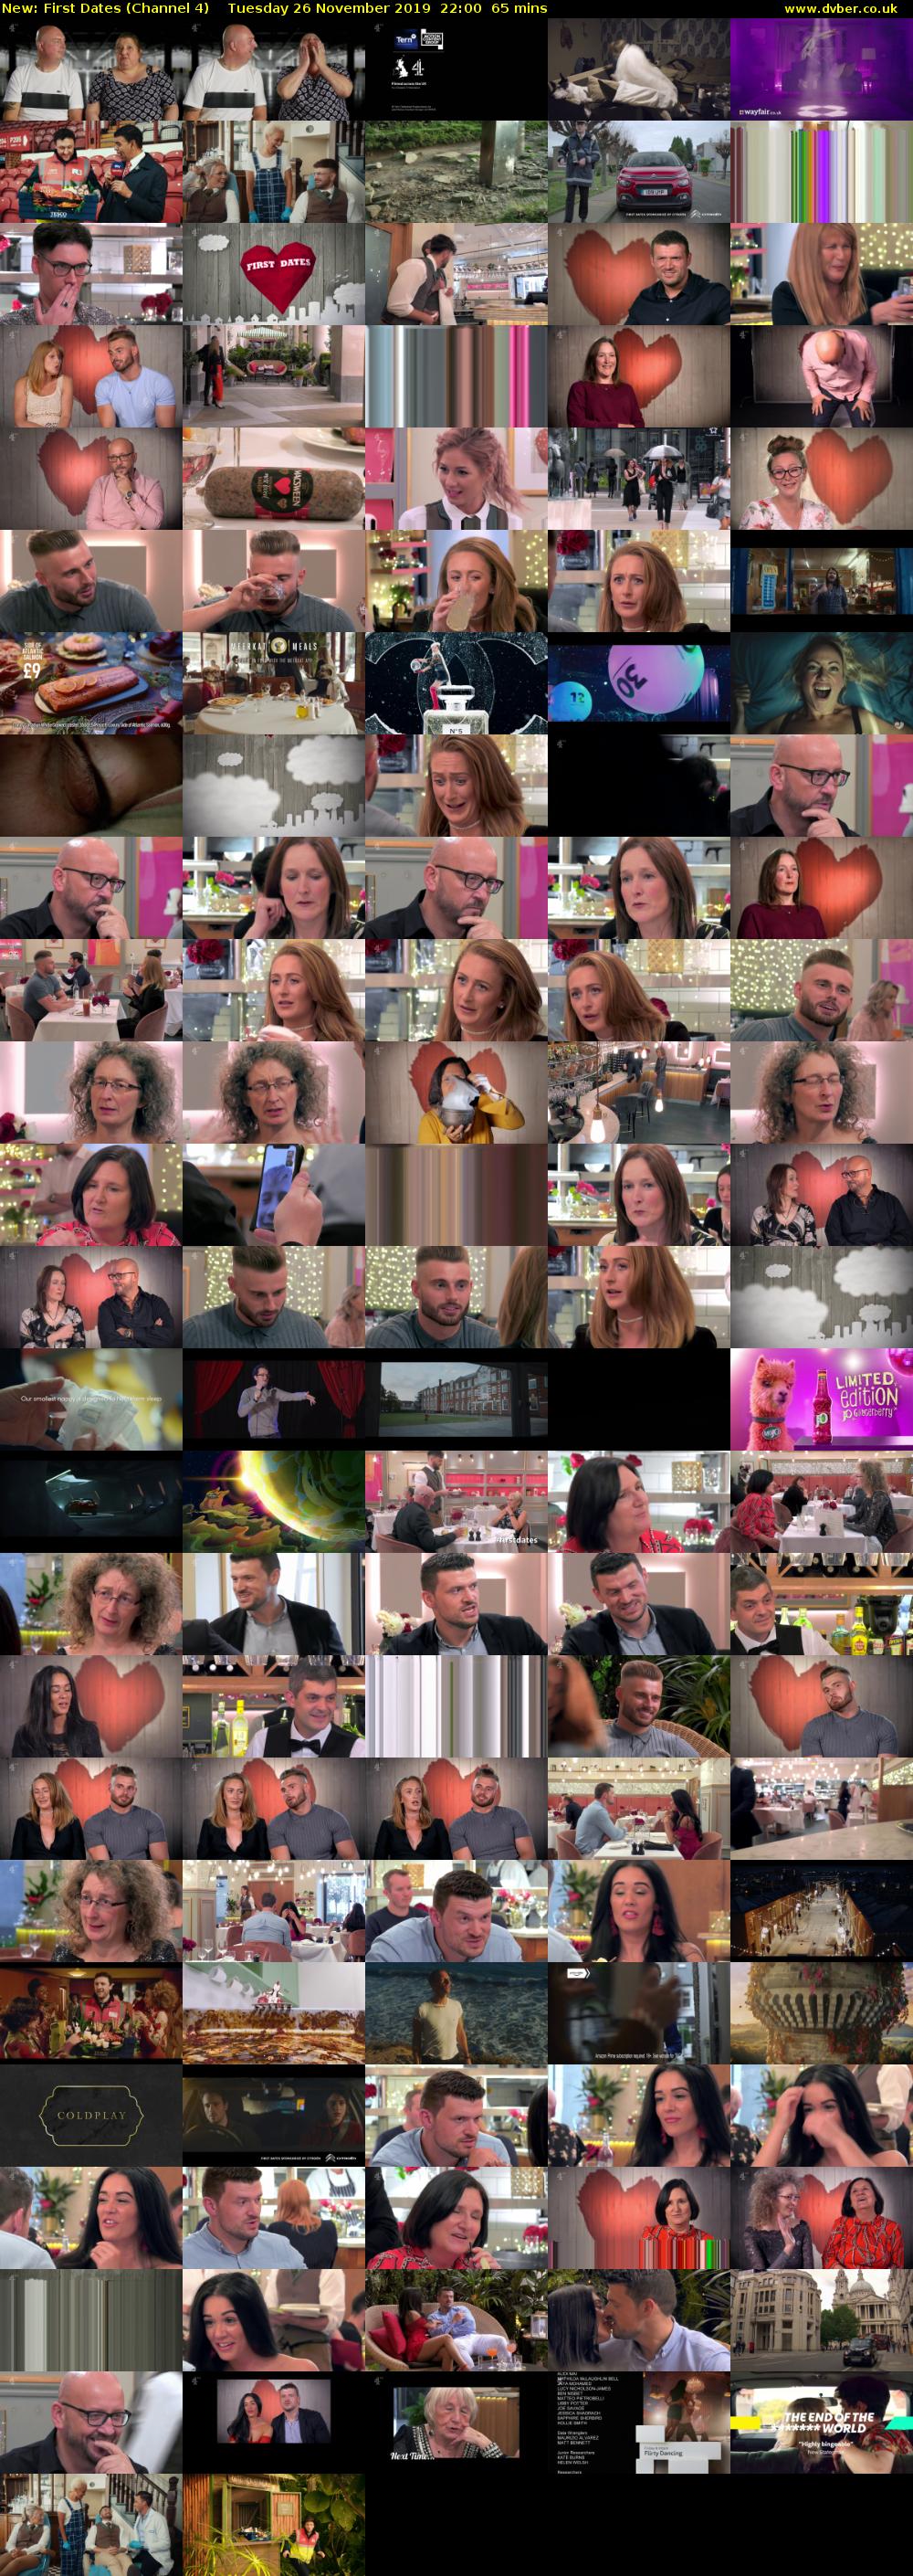 First Dates (Channel 4) Tuesday 26 November 2019 22:00 - 23:05